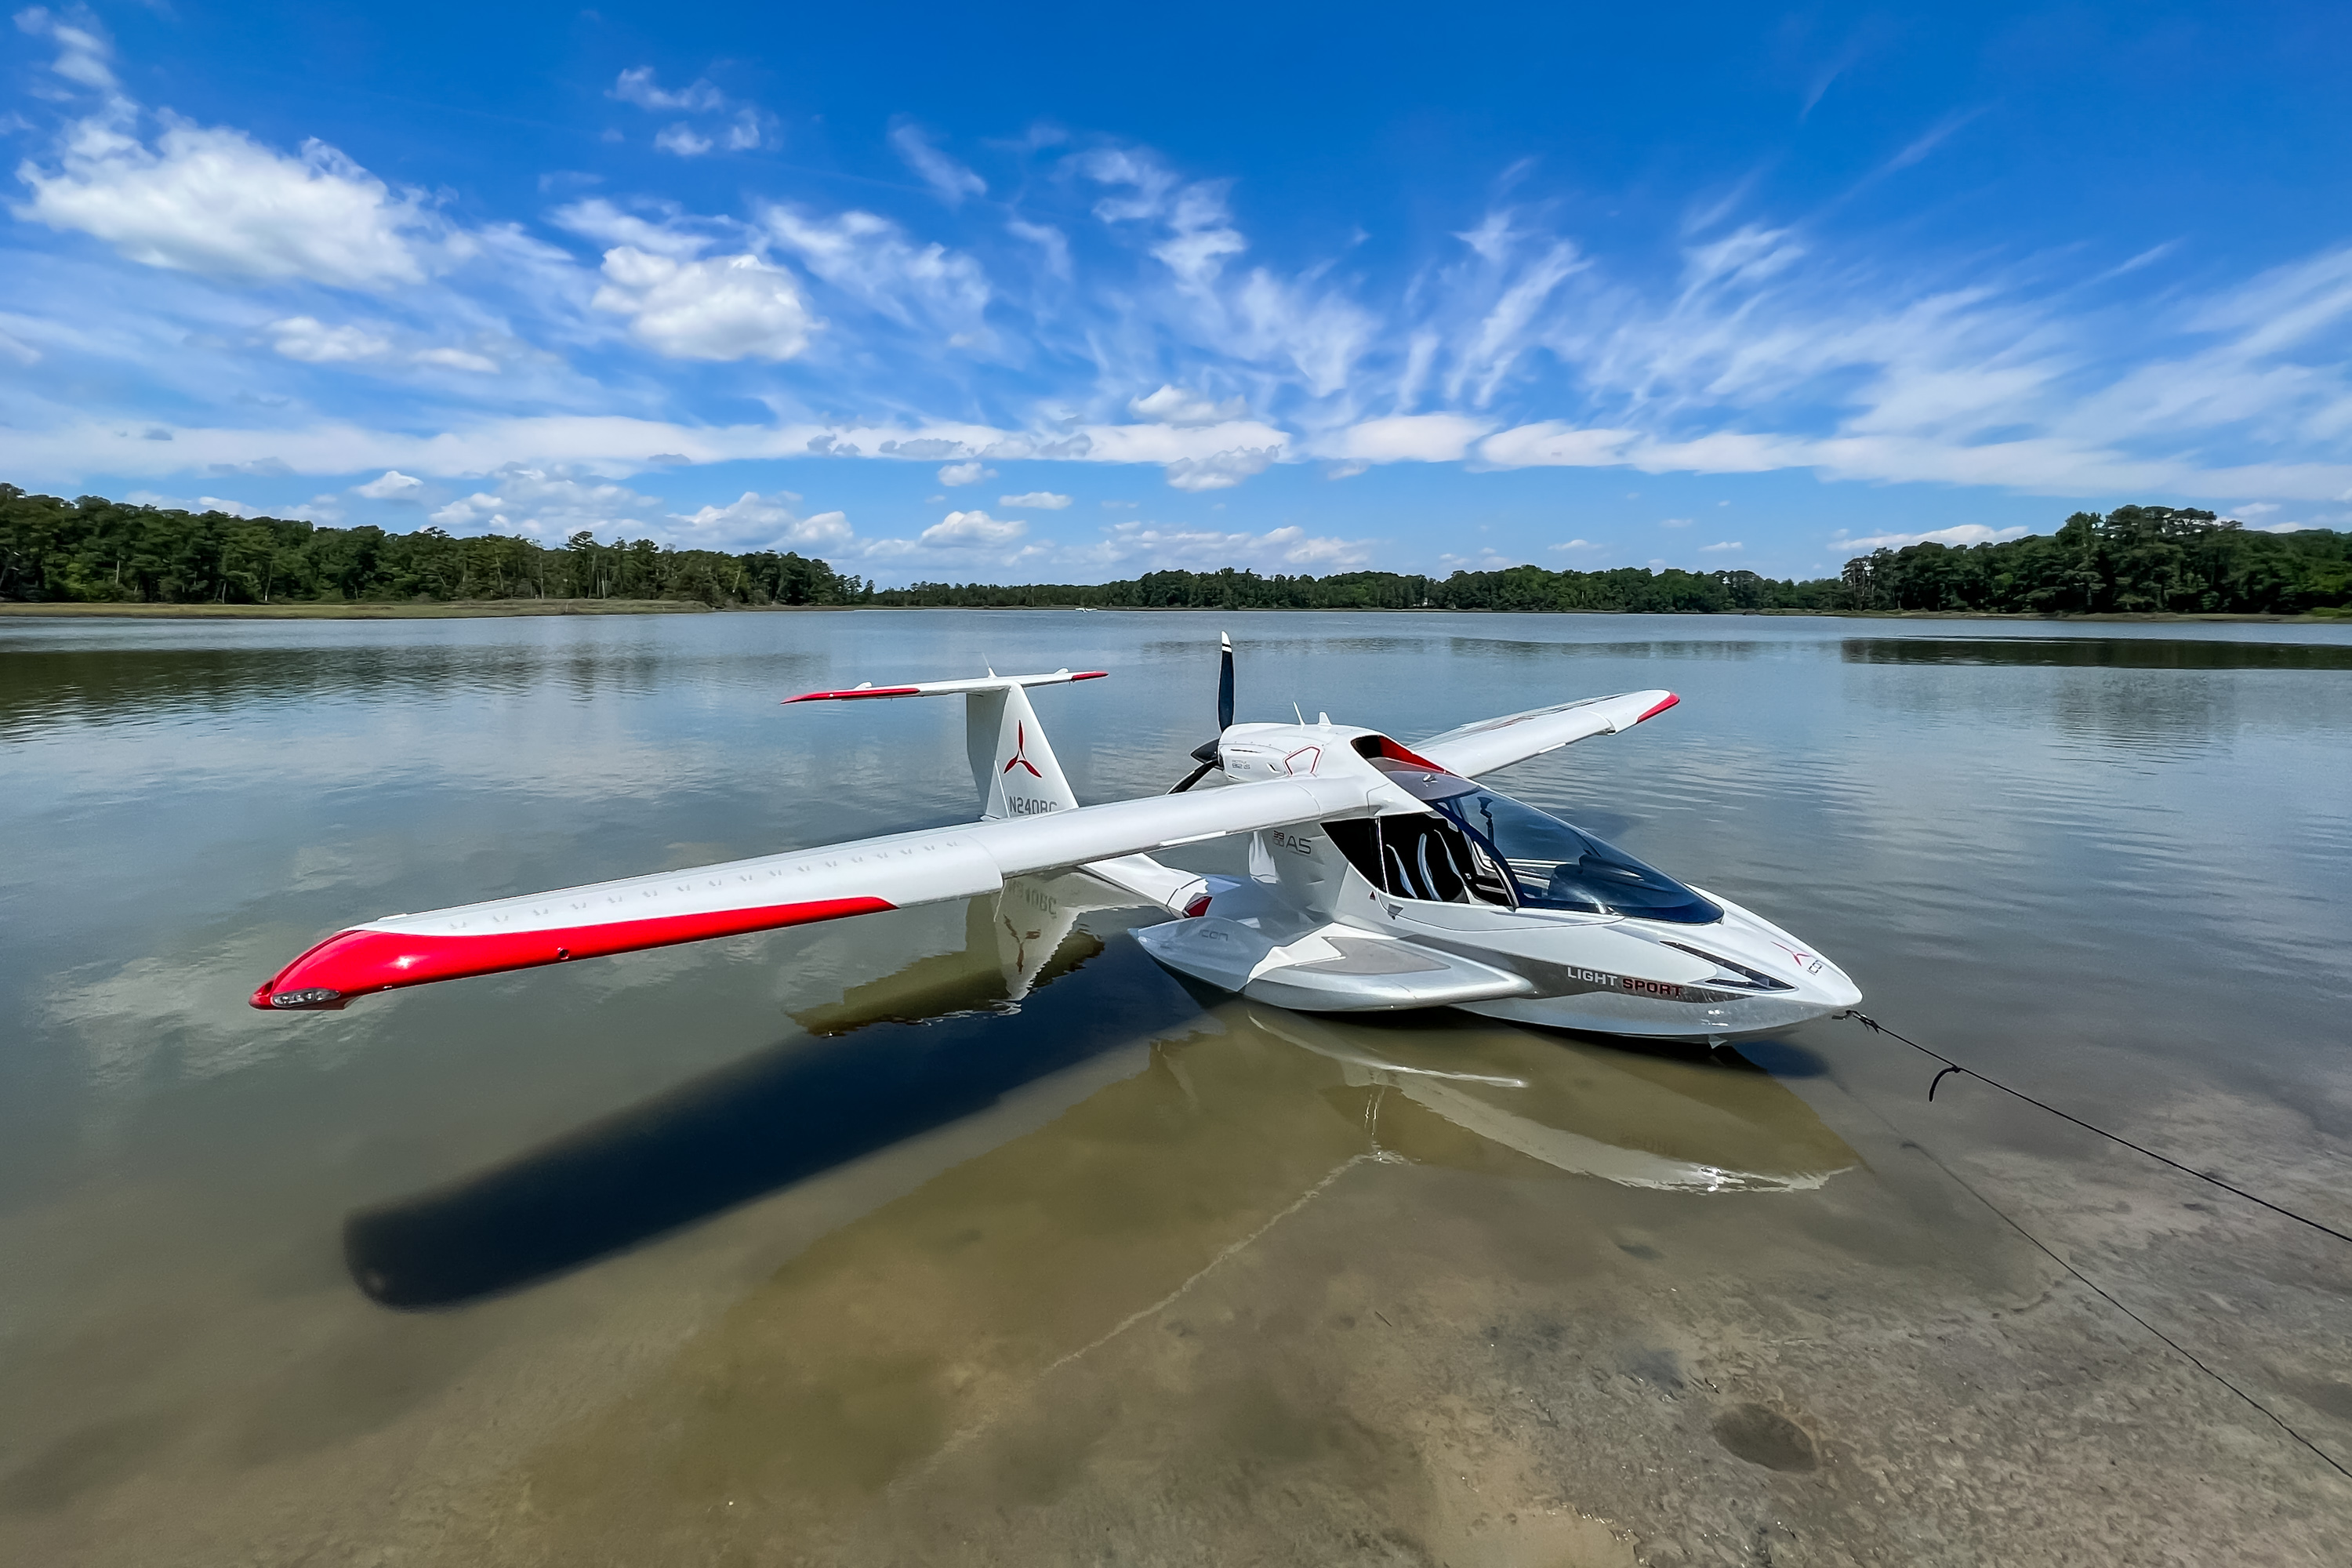 $173M in Debt: Amphibious Plane Company Files for Bankruptcy, Seeks Buyer